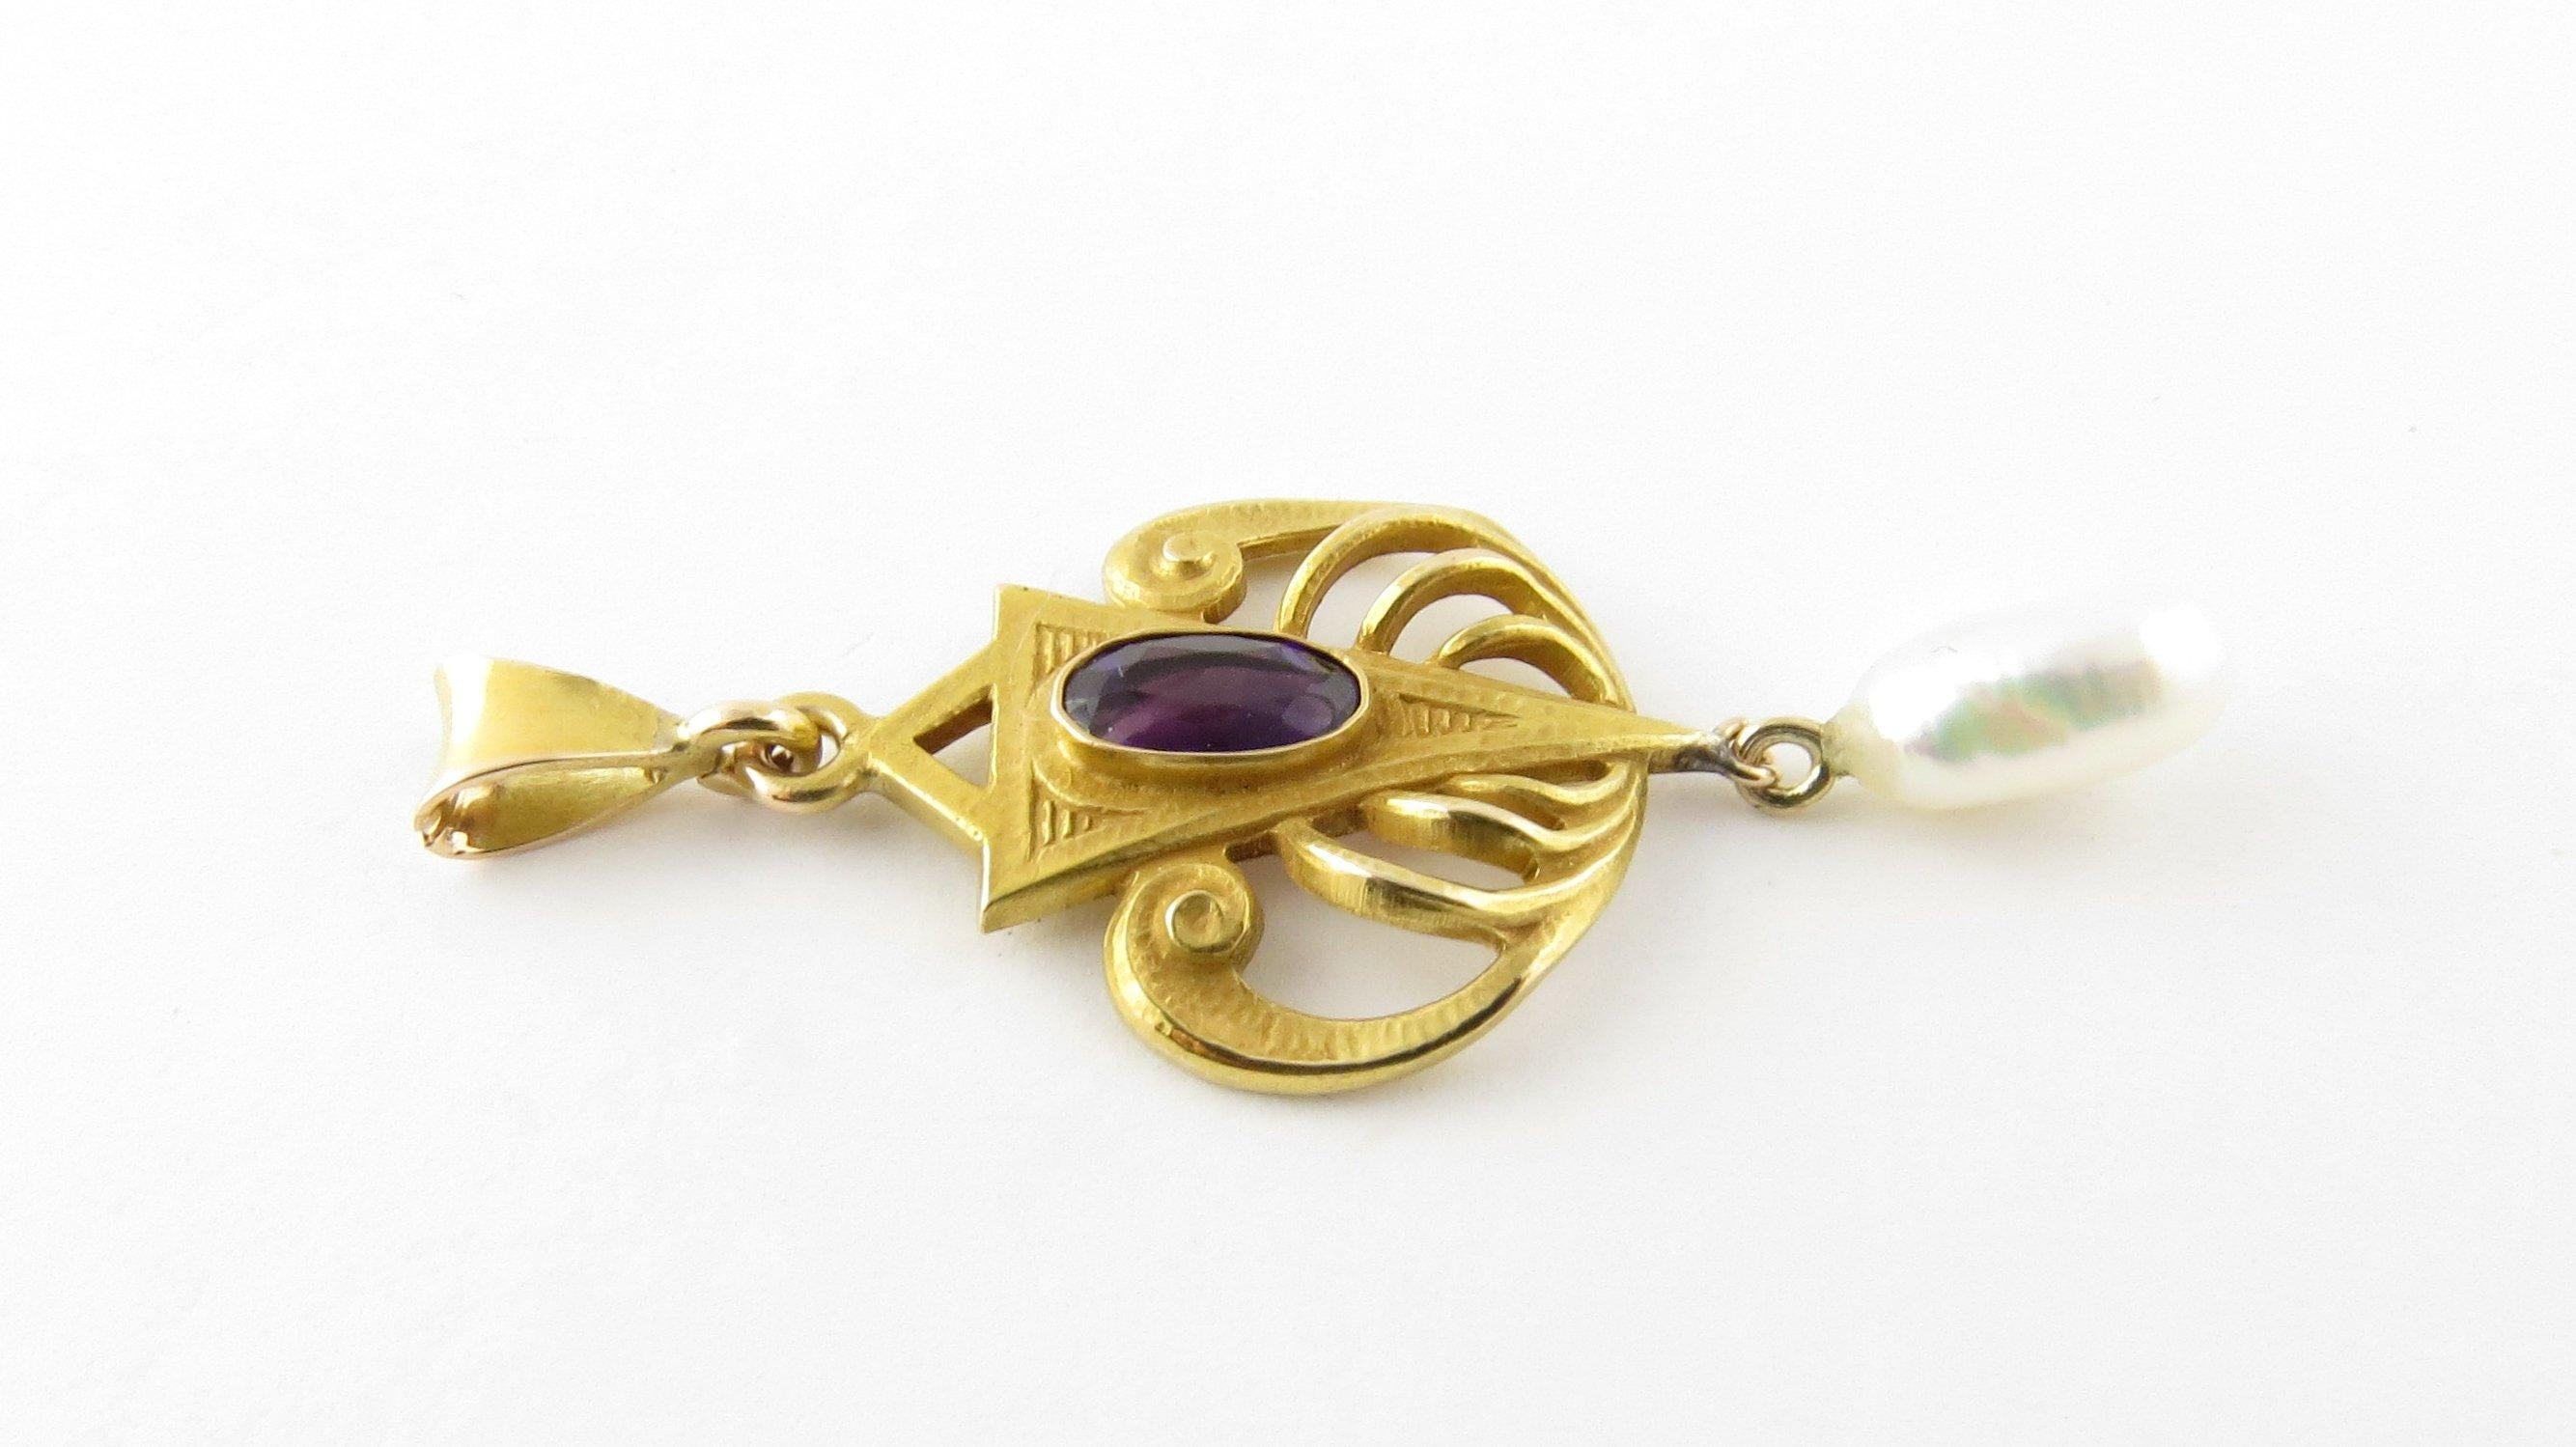 Vintage 14 Karat Yellow Gold, Amethyst and Pearl Pendant- This lovely pendant features one oval amethyst (7 mm x 4 mm) and one freshwater pearl (10 mm x 5 mm) crafted in beautifully detailed 14K gold. Size: 24 mm x 18 mmWeight: 1.7 dwt. / 2.7 gr.